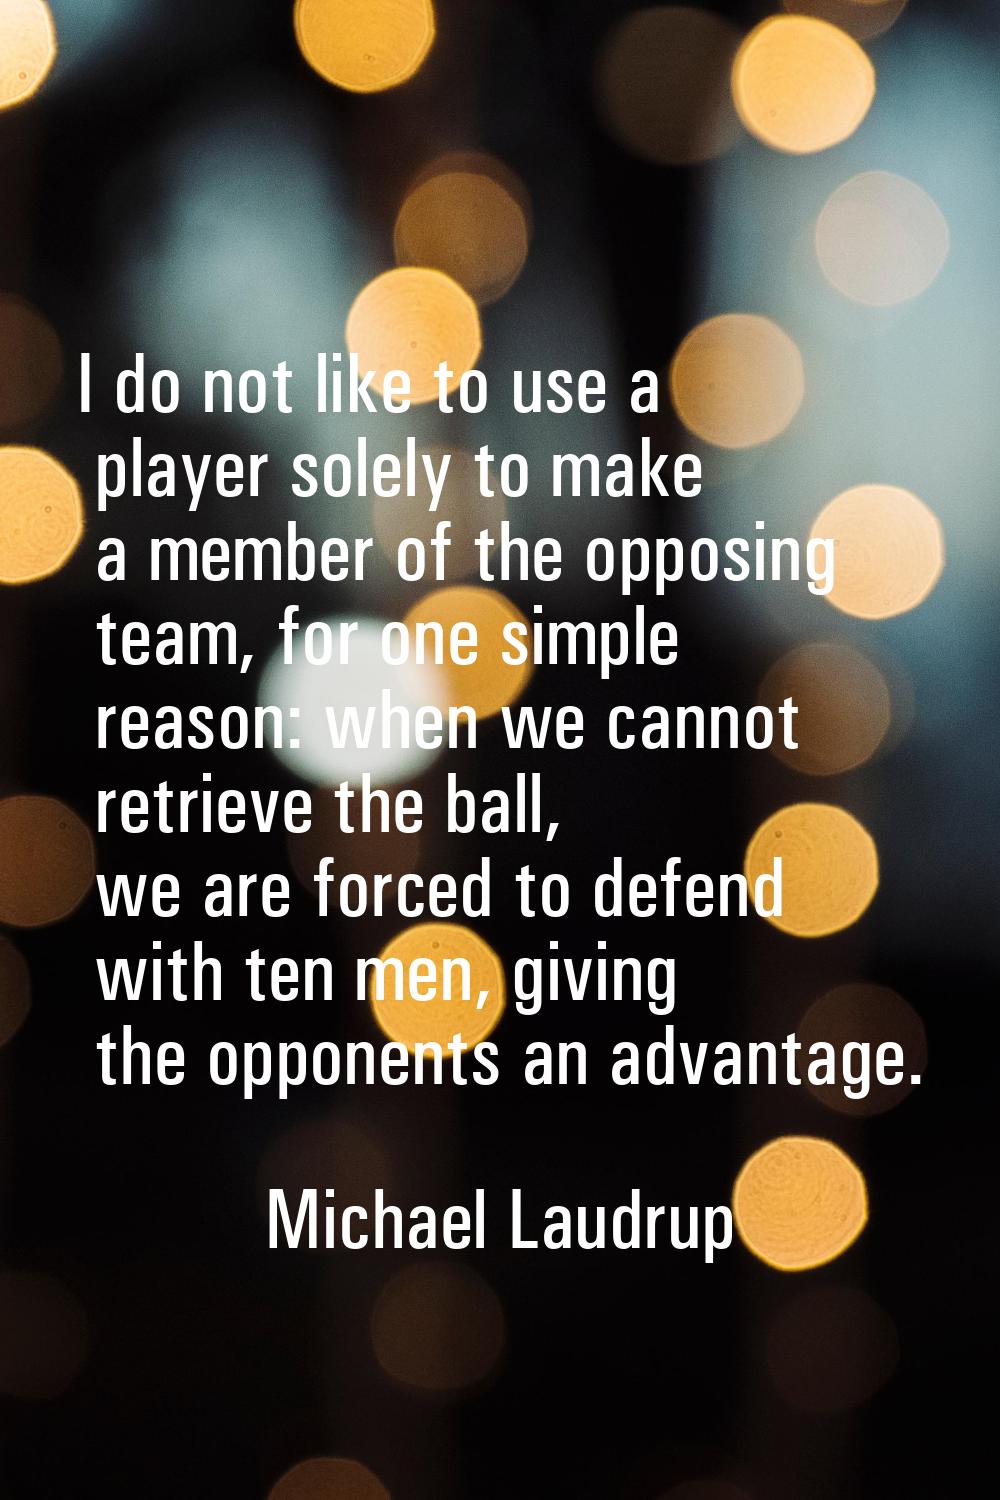 I do not like to use a player solely to make a member of the opposing team, for one simple reason: 